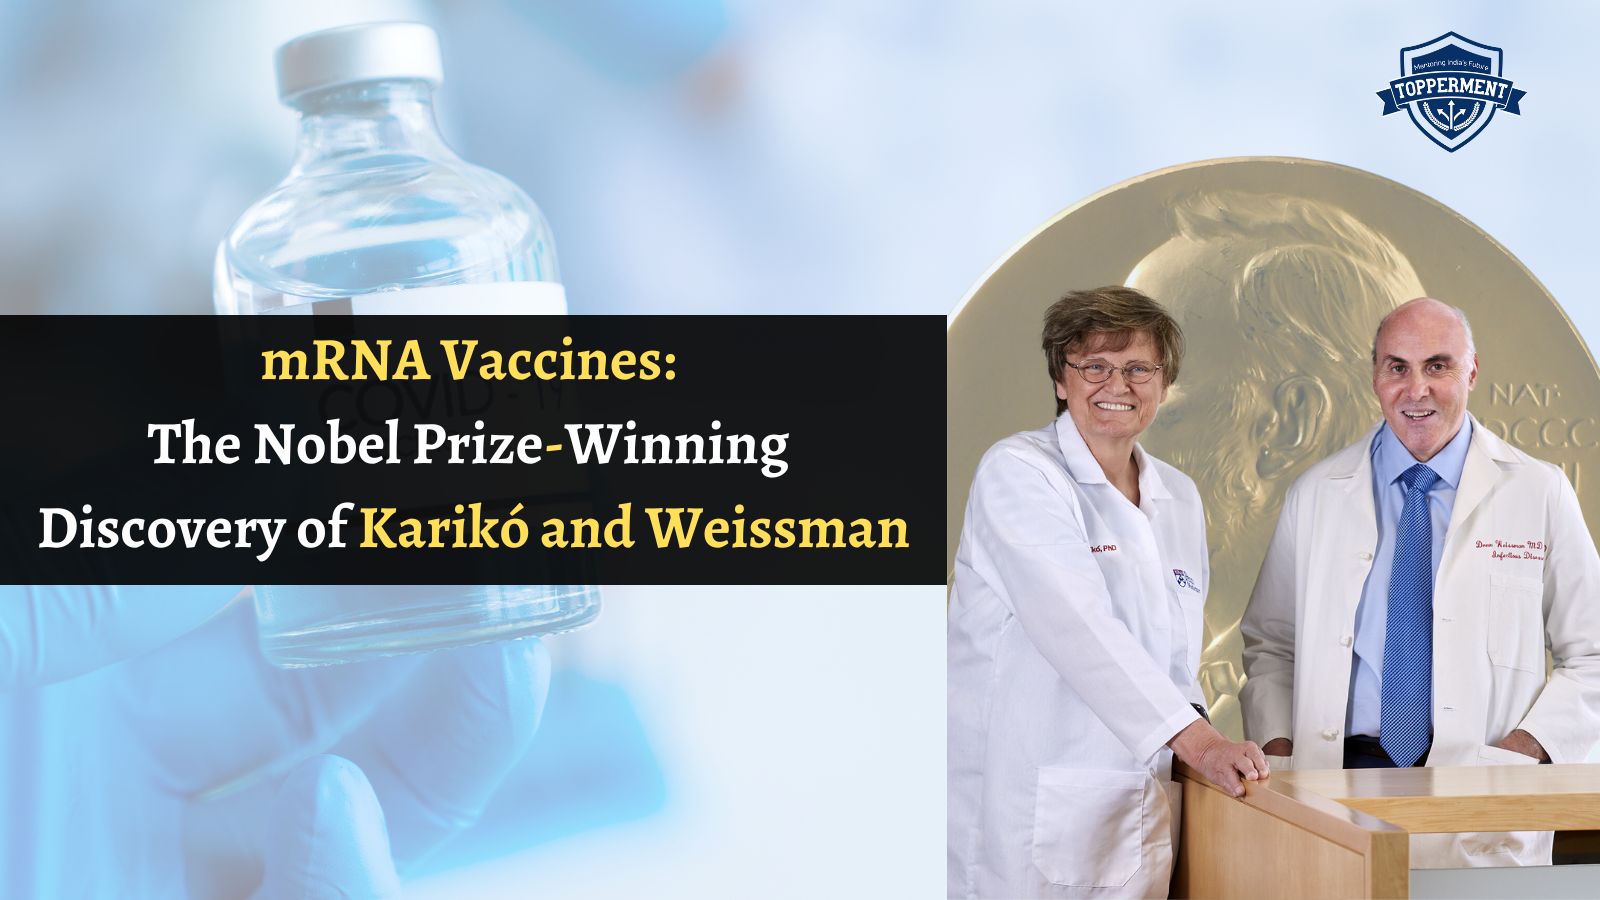 mRNA Vaccines The Nobel Prize-Winning Discovery of Karikó and Weissman-TopperMent